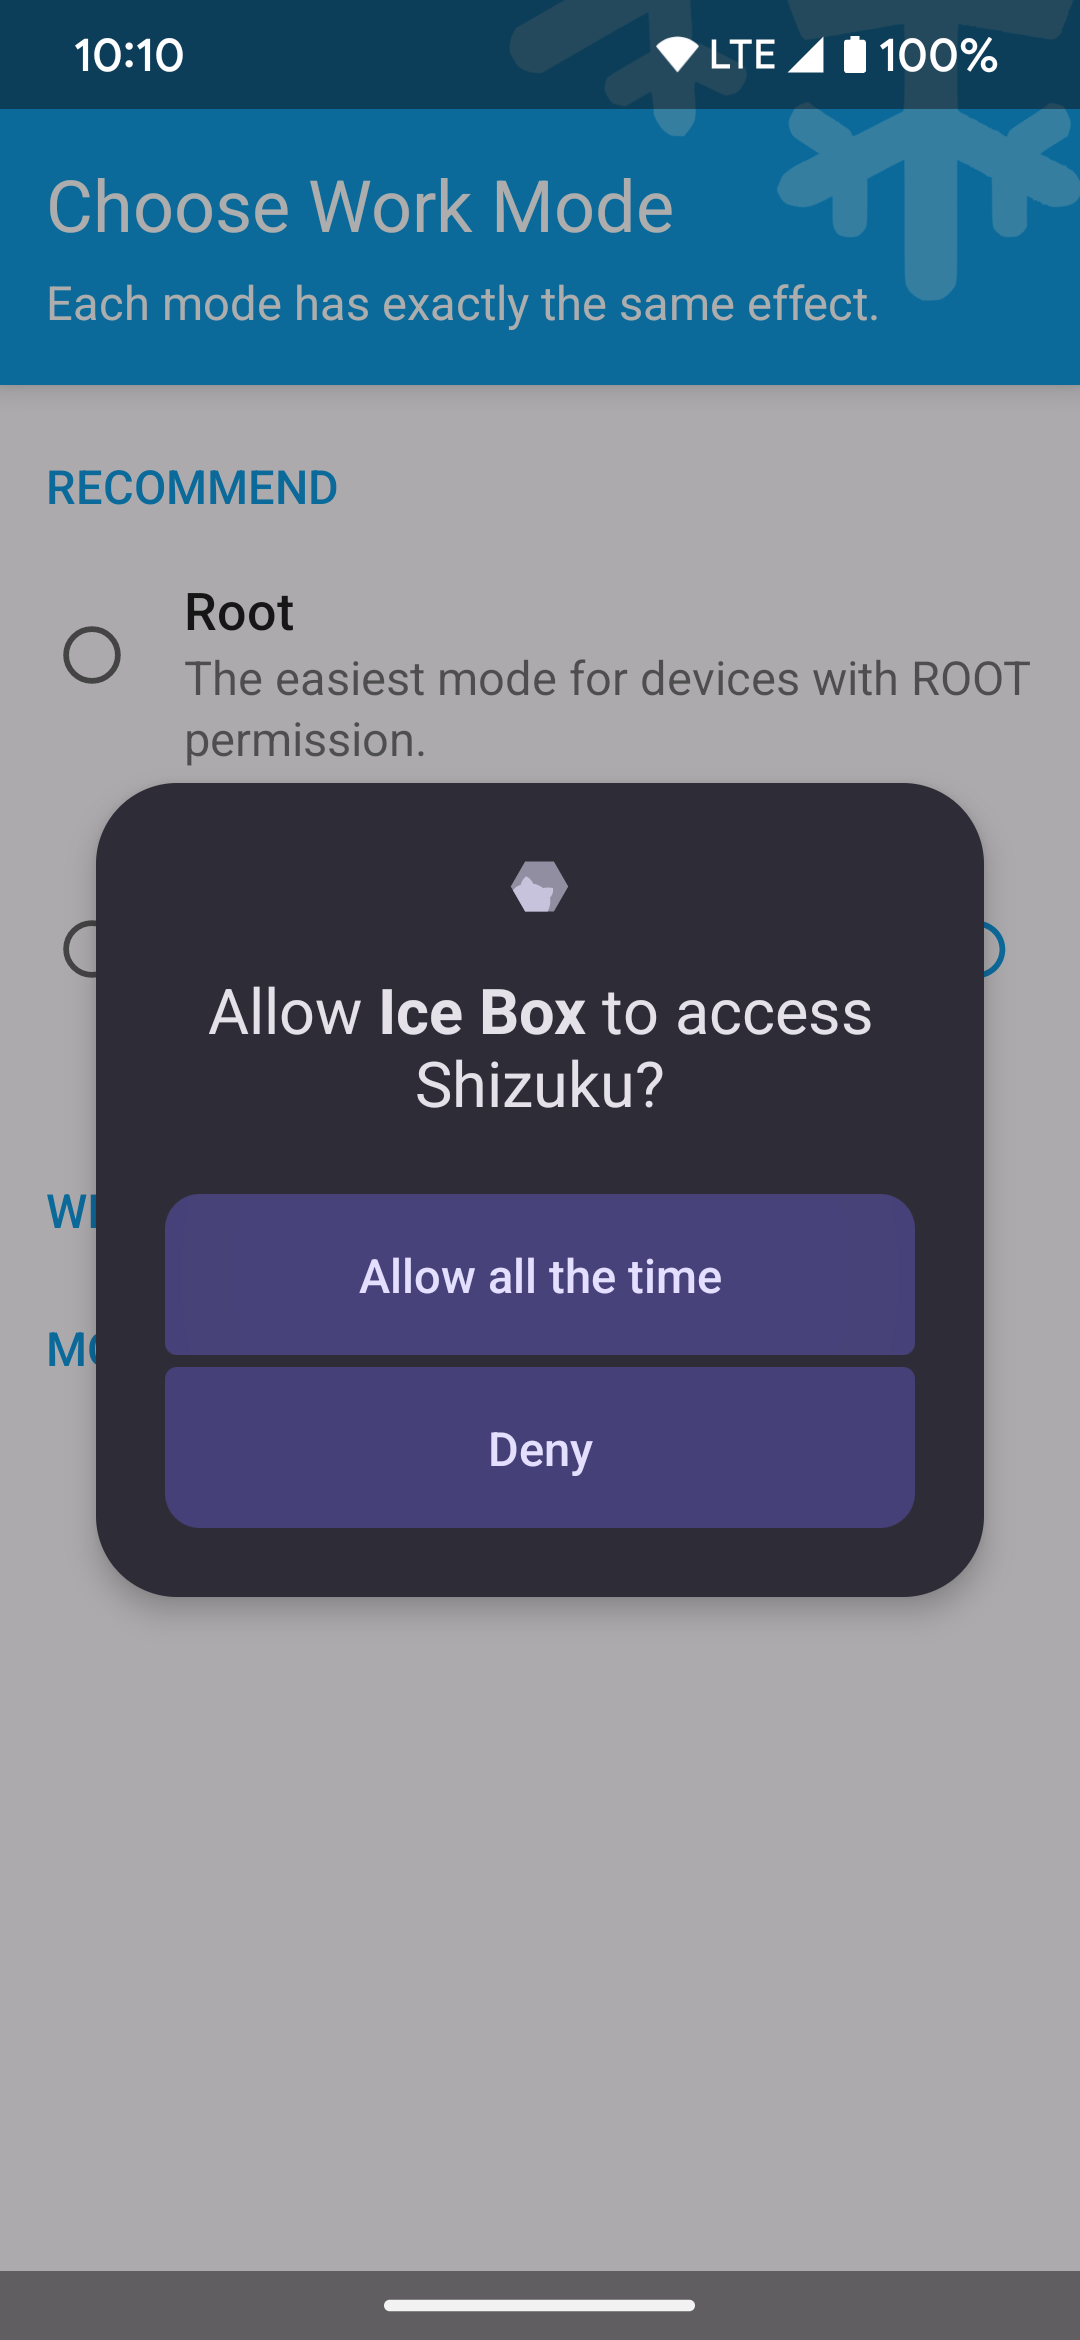 Granting the required Ice Box app permission for the Shizuku service